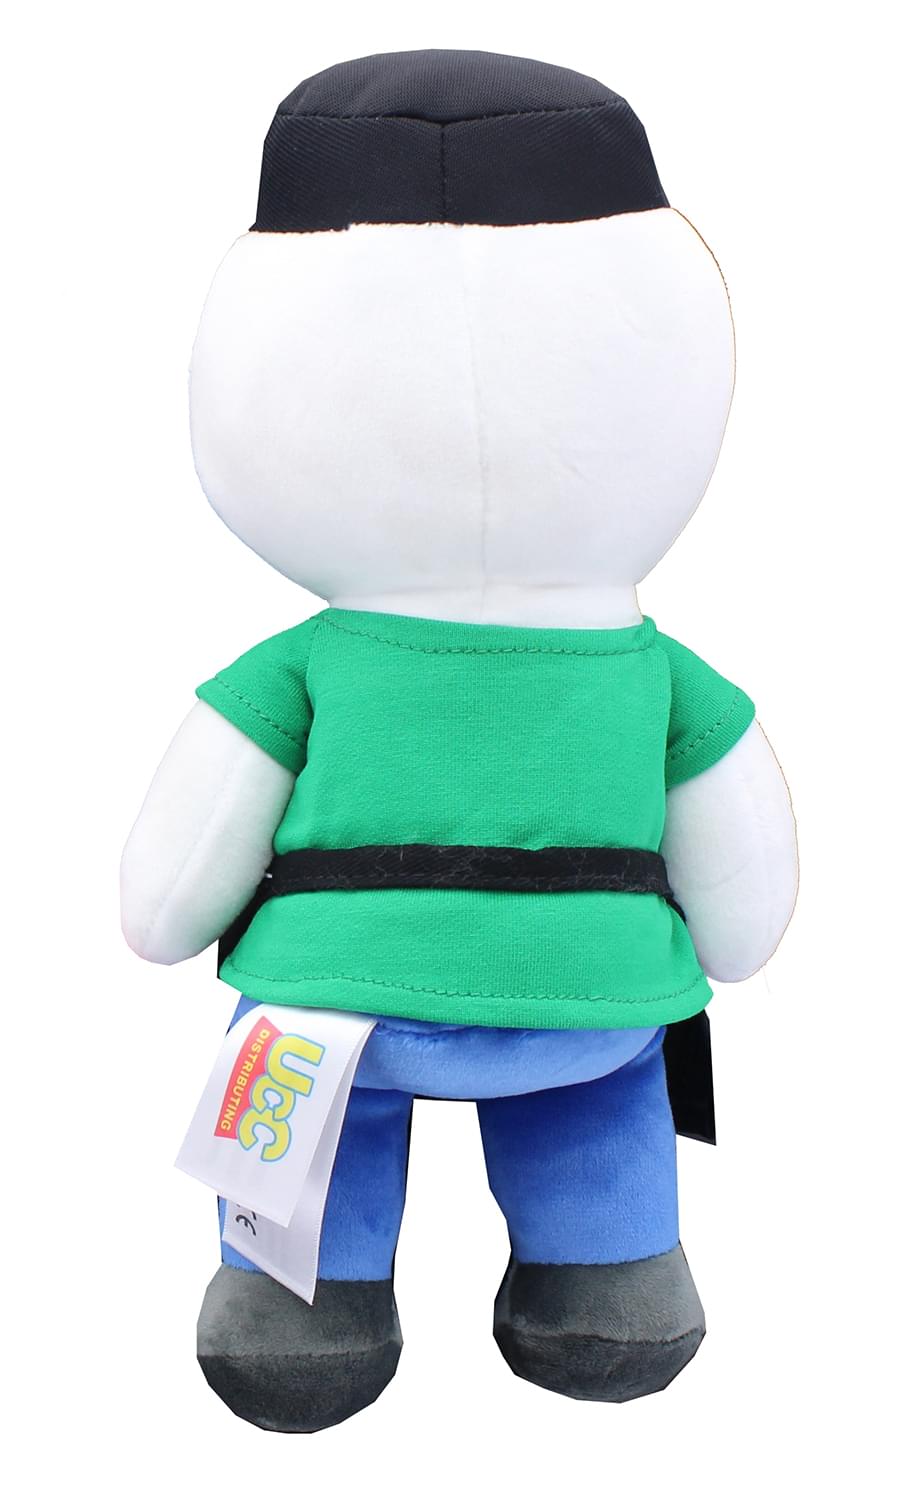 The Odd 1s Out 8 Inch Full Body Plush |Sooubway James With Green Shirt